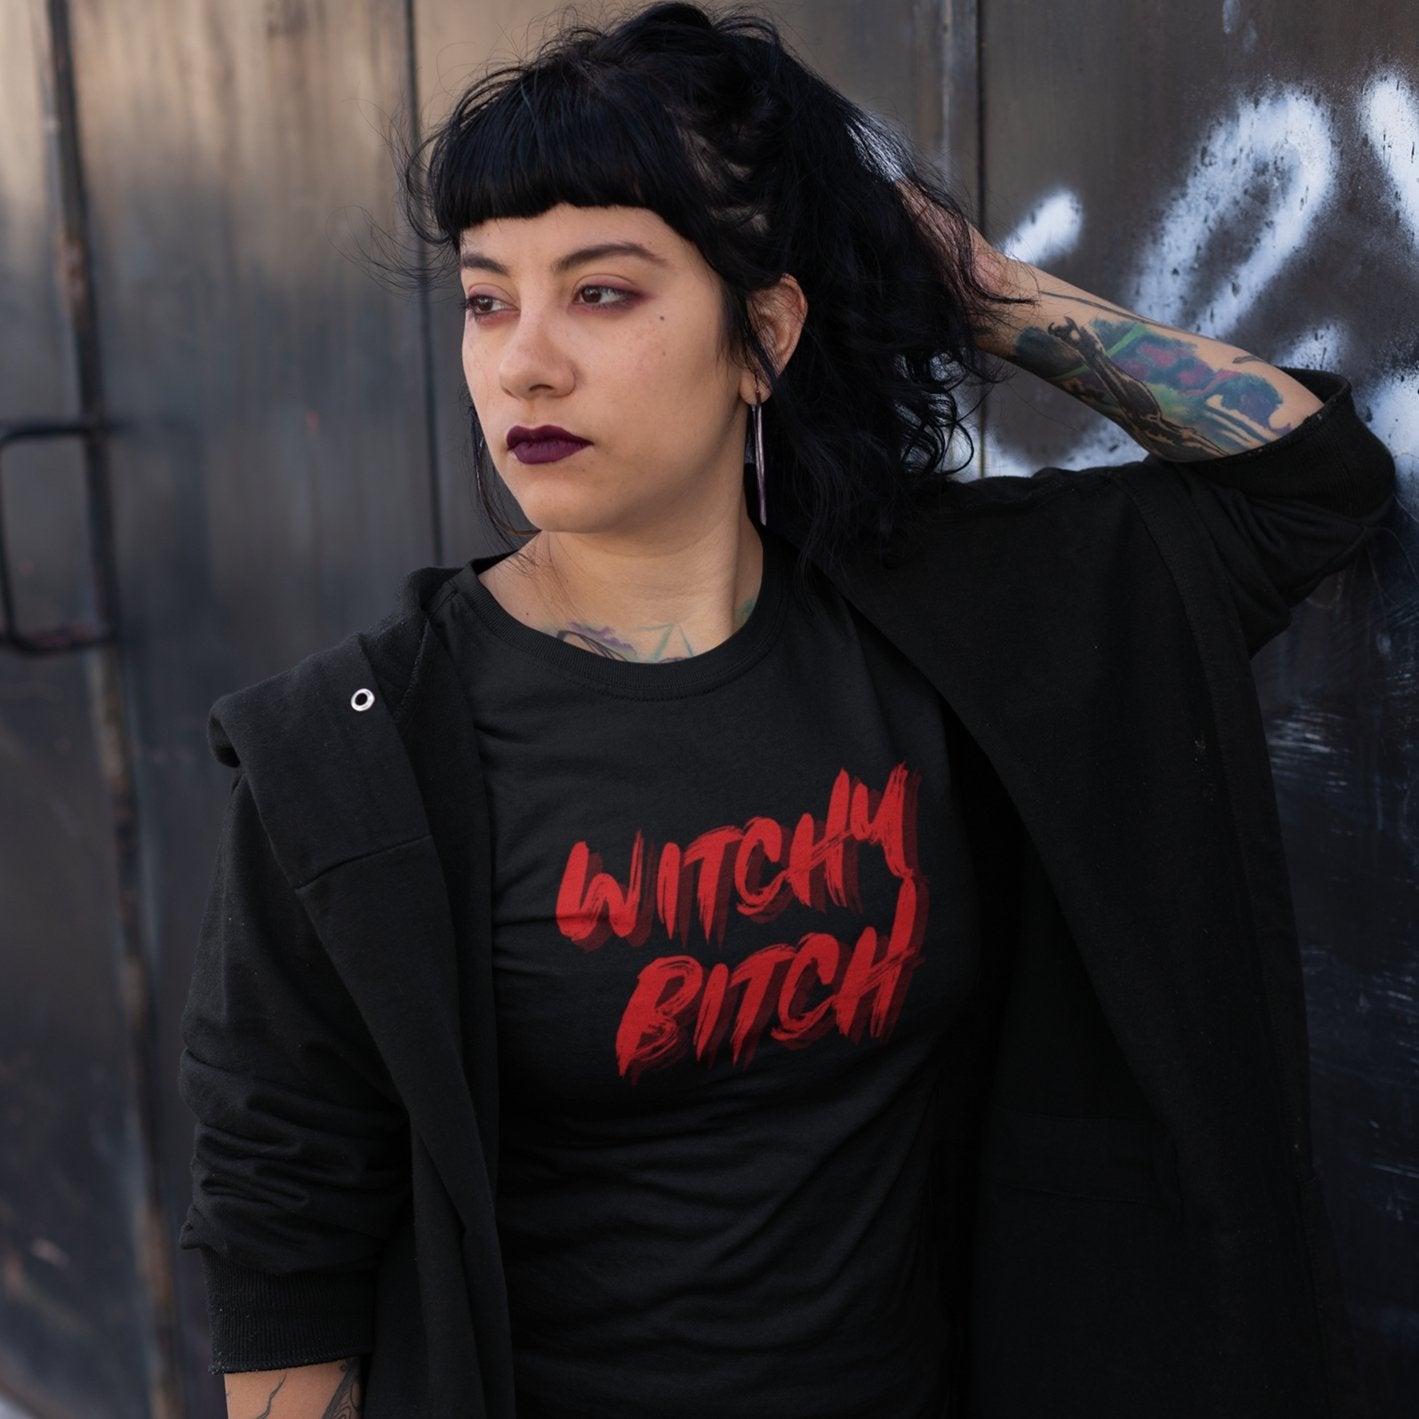 Witchy B-tch T-Shirt - Lost Minds Clothing